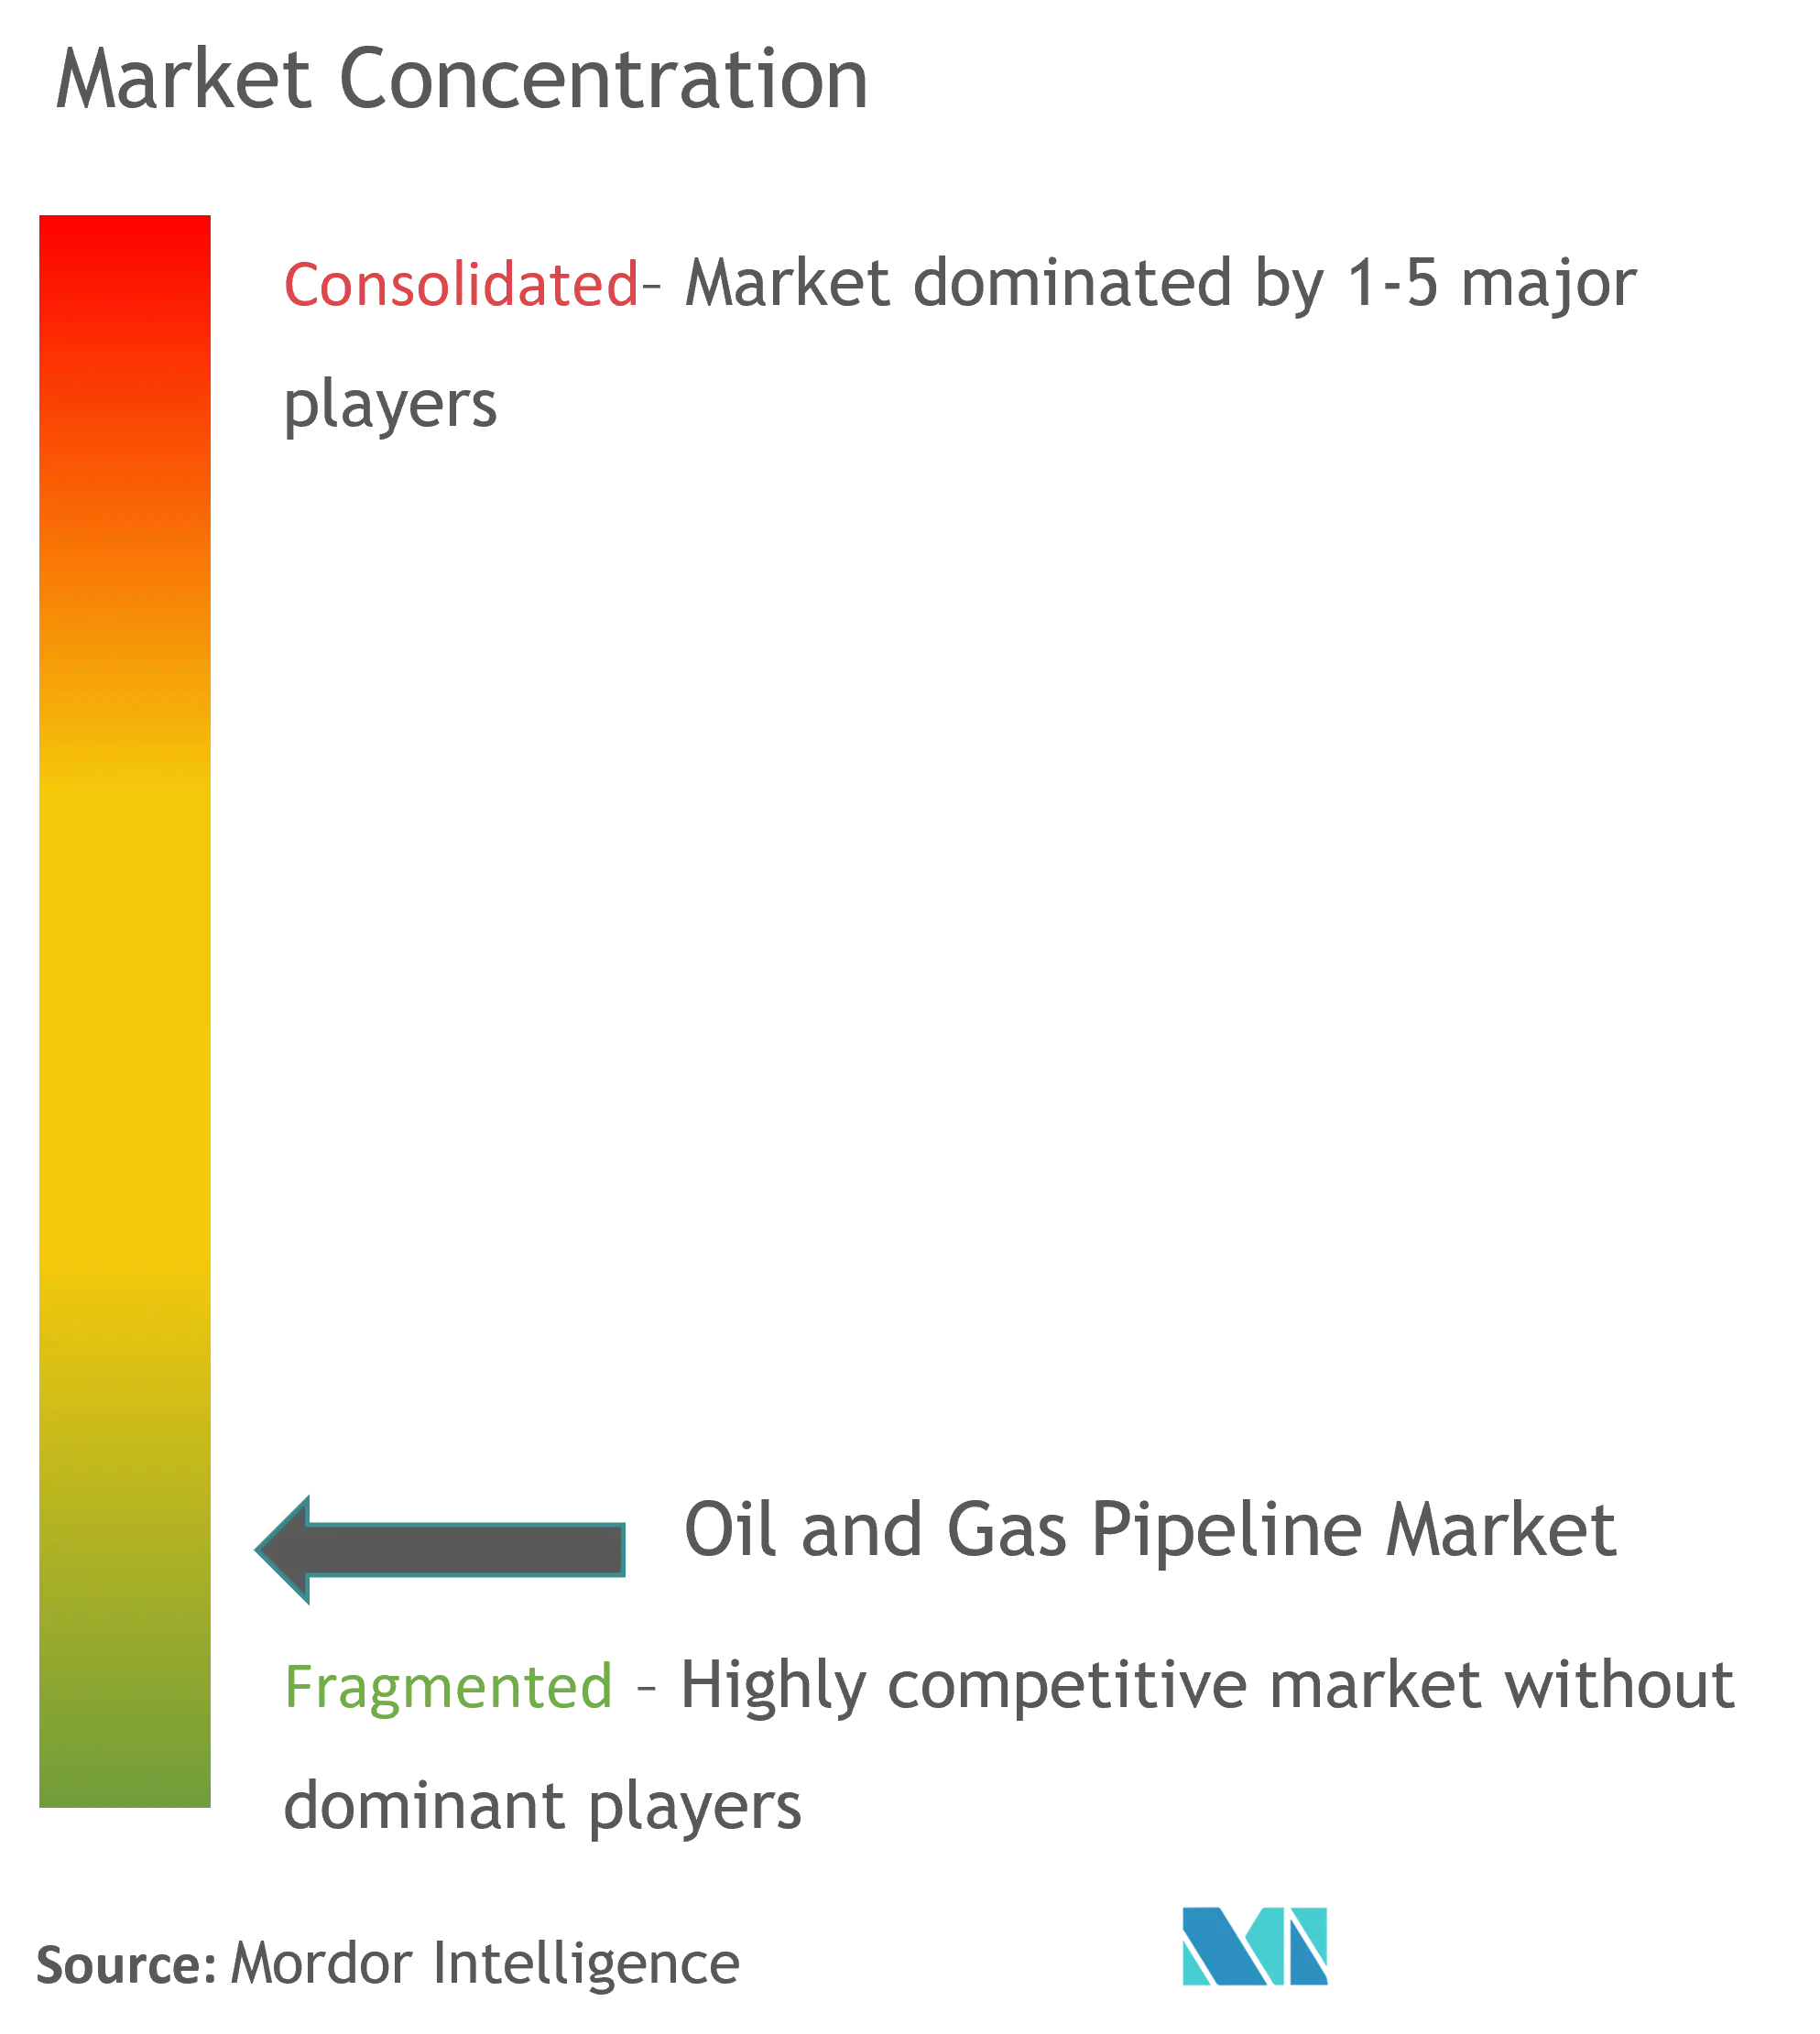 Oil and Gas Pipeline Market Concentration